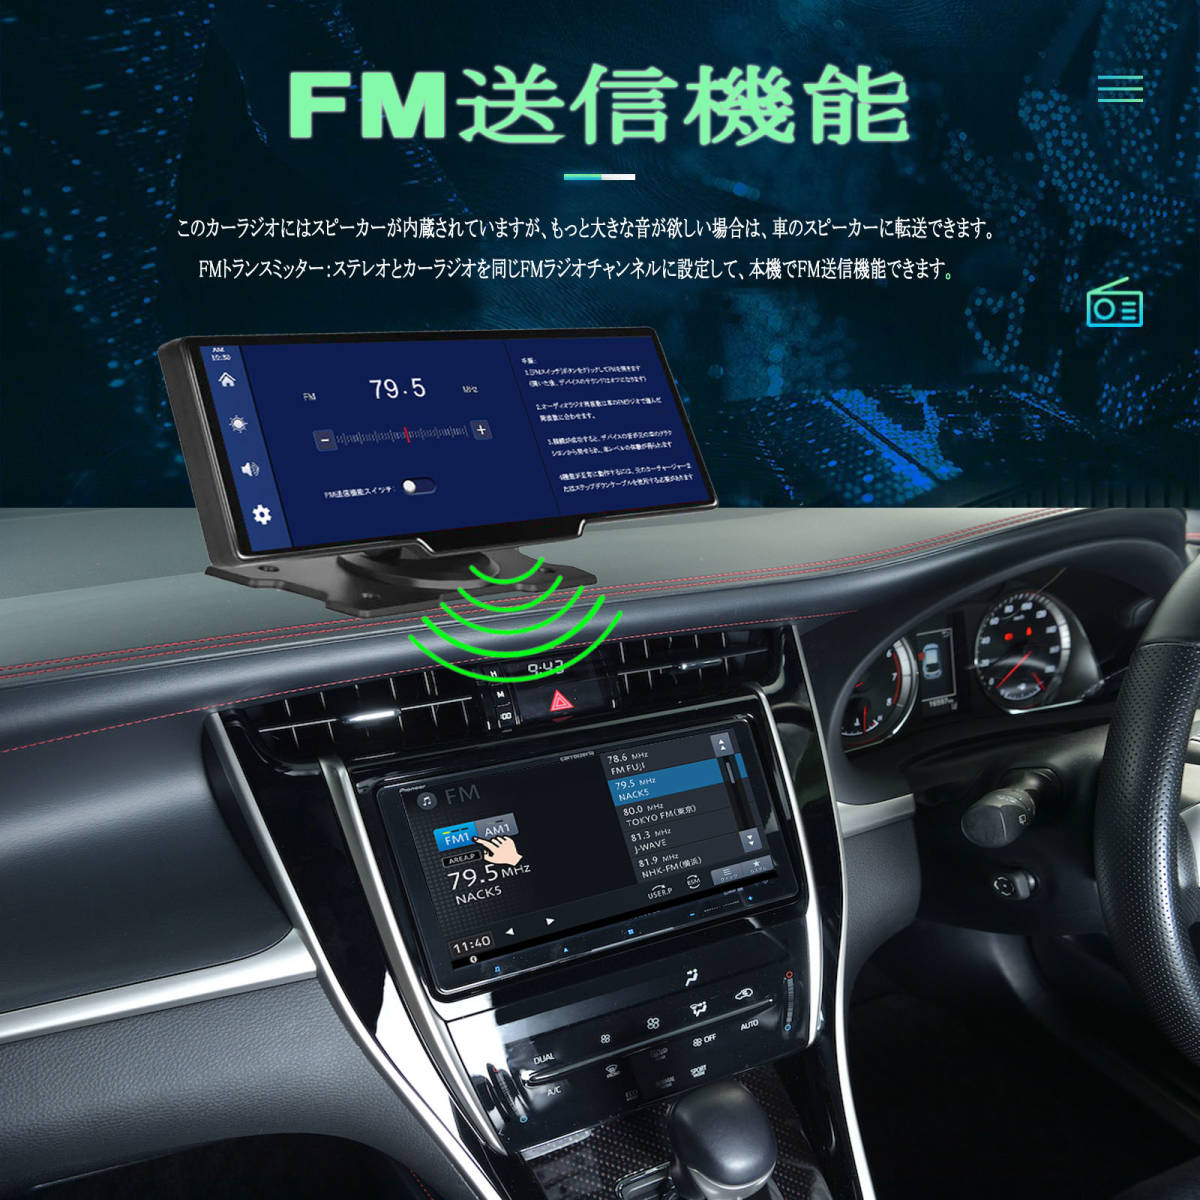 10.26 type CarPlay on dash monitor drive recorder front monitor car navigation system rom and rear (before and after) same time video recording 